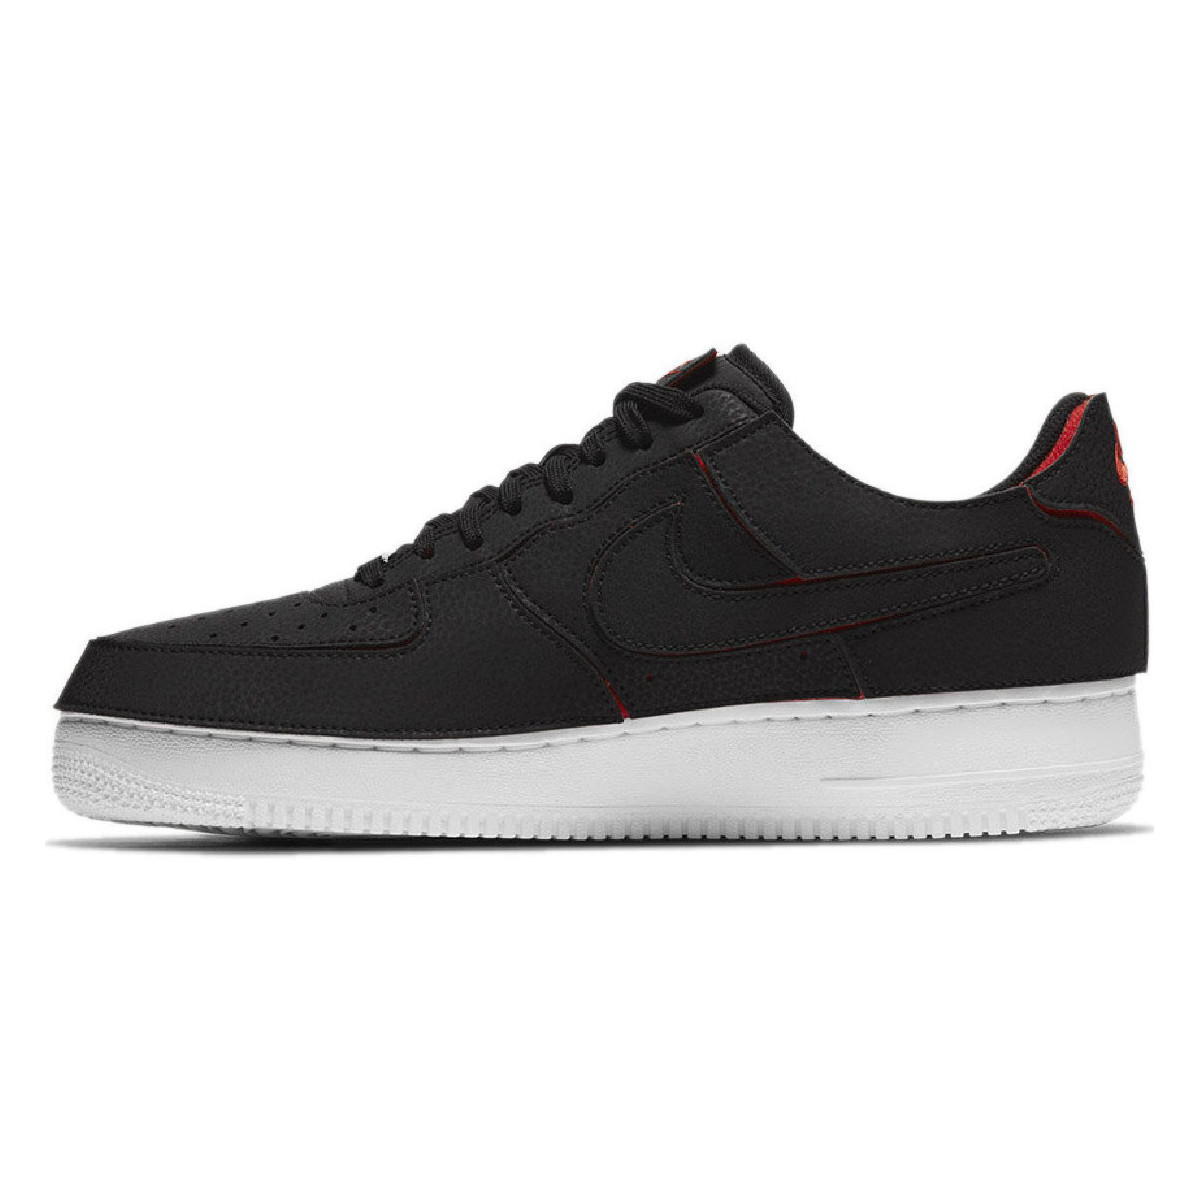 Chaussures Homme Baskets basses Nike AIR FORCE 1 LO Noir